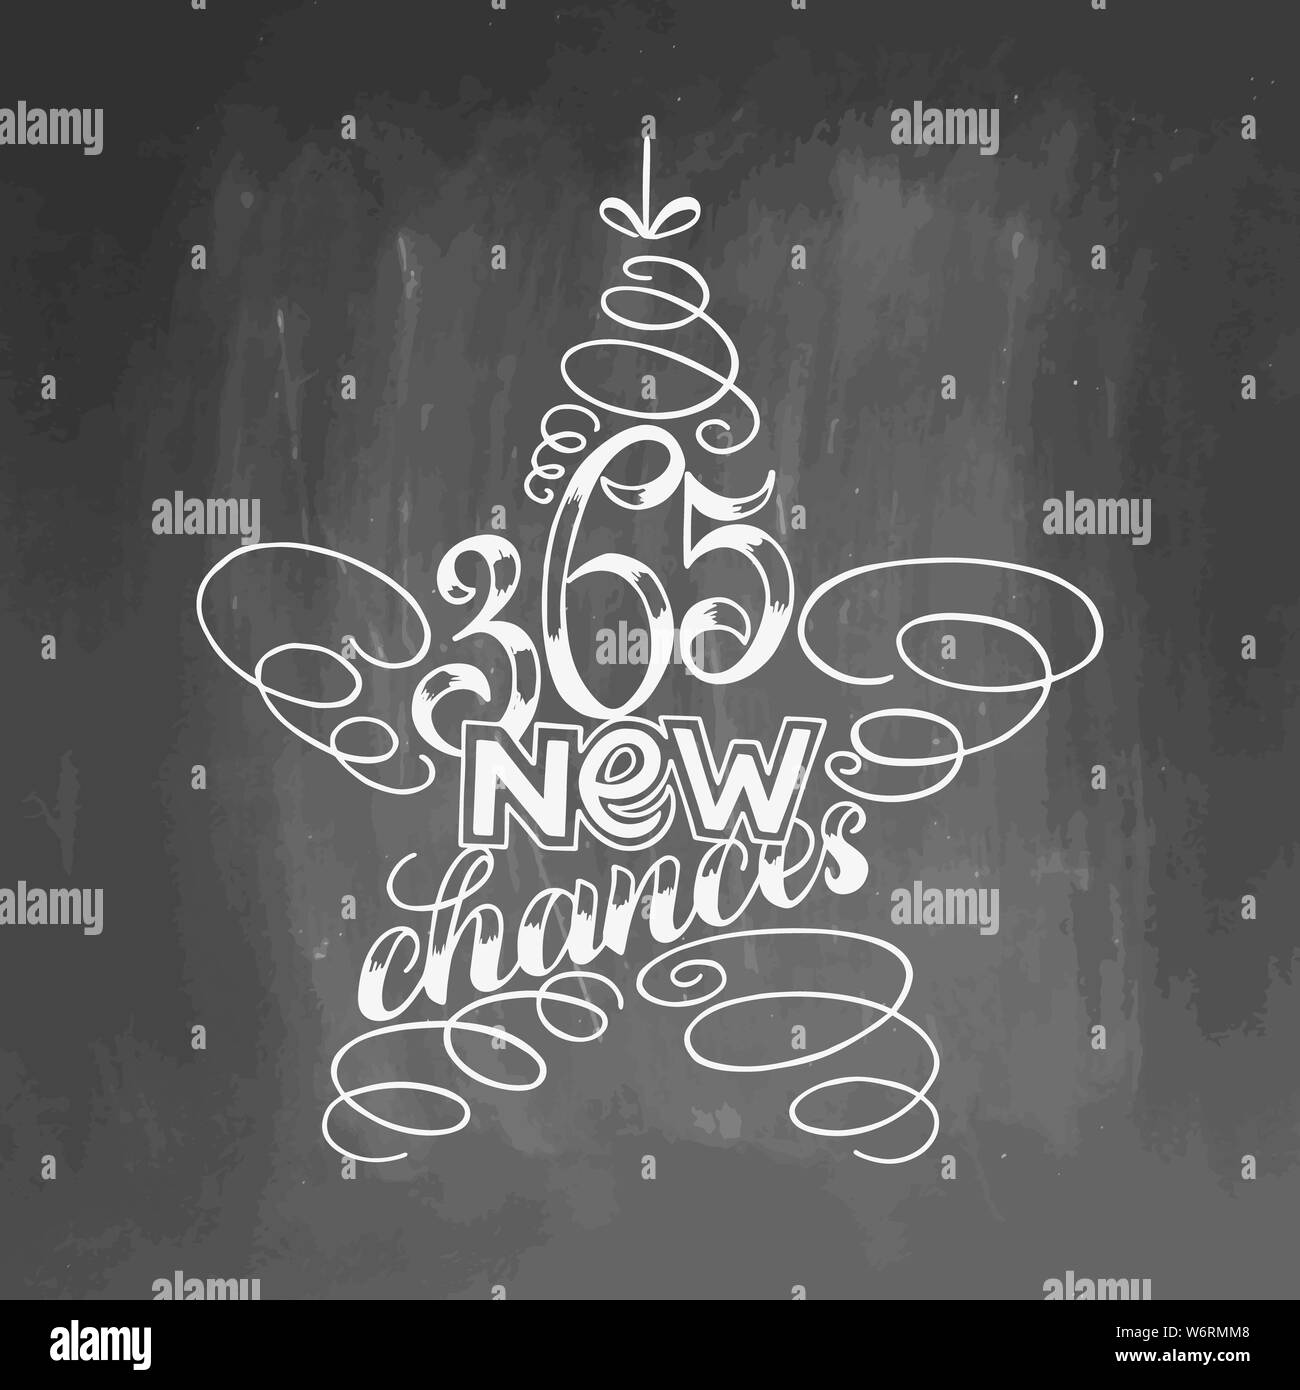 365 new chances lettering framed in star tree toy. Hand drawn calligraphy lettering inspirational quotes. Chalkboard background, white letters,  illus Stock Photo